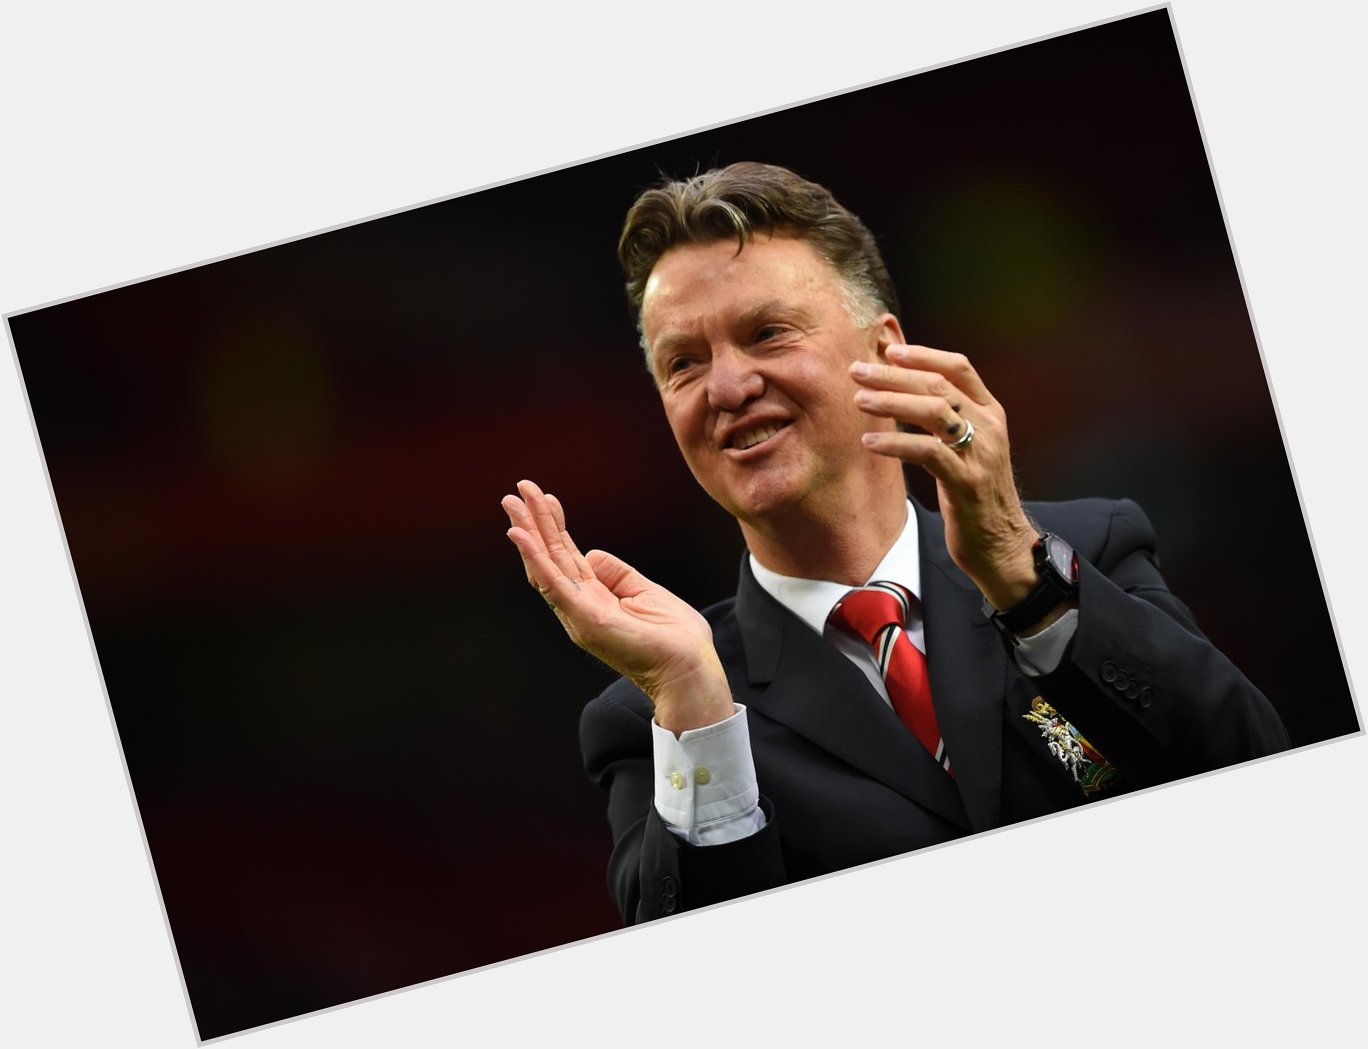 LIVE: Will it be a happy birthday for Louis van Gaal?
Follow in with us:  